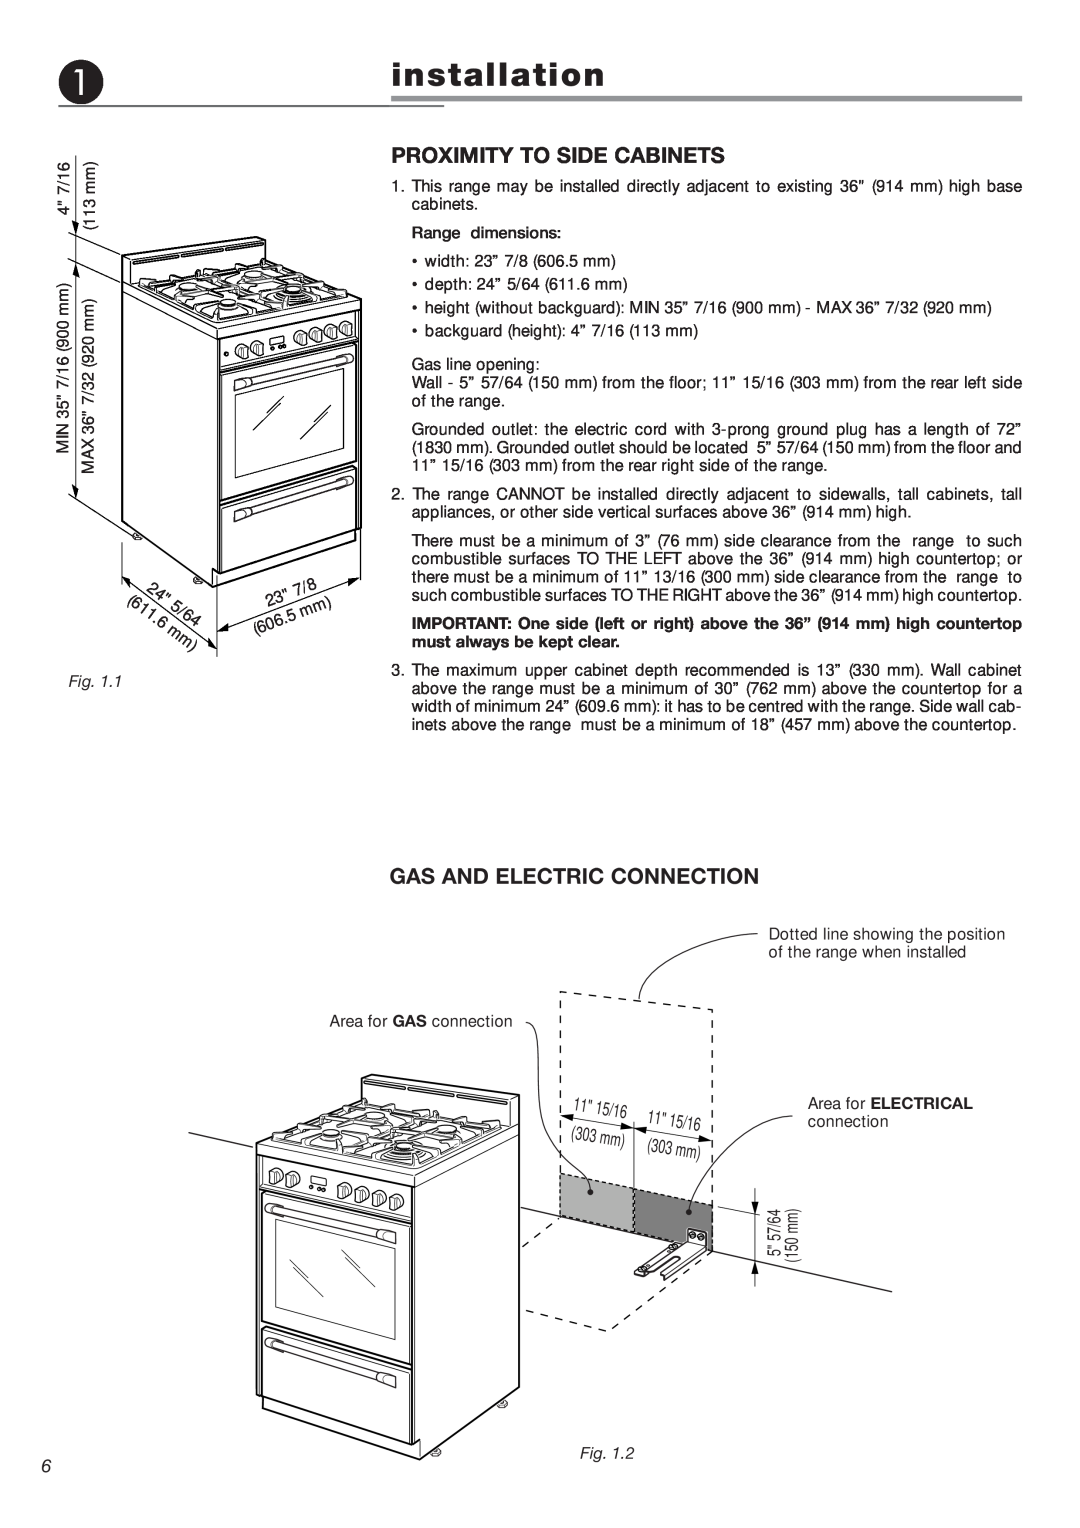 DeLonghi DEFSGG 24 SS installation instructions Proximity To Side Cabinets, Gas And Electric Connection 